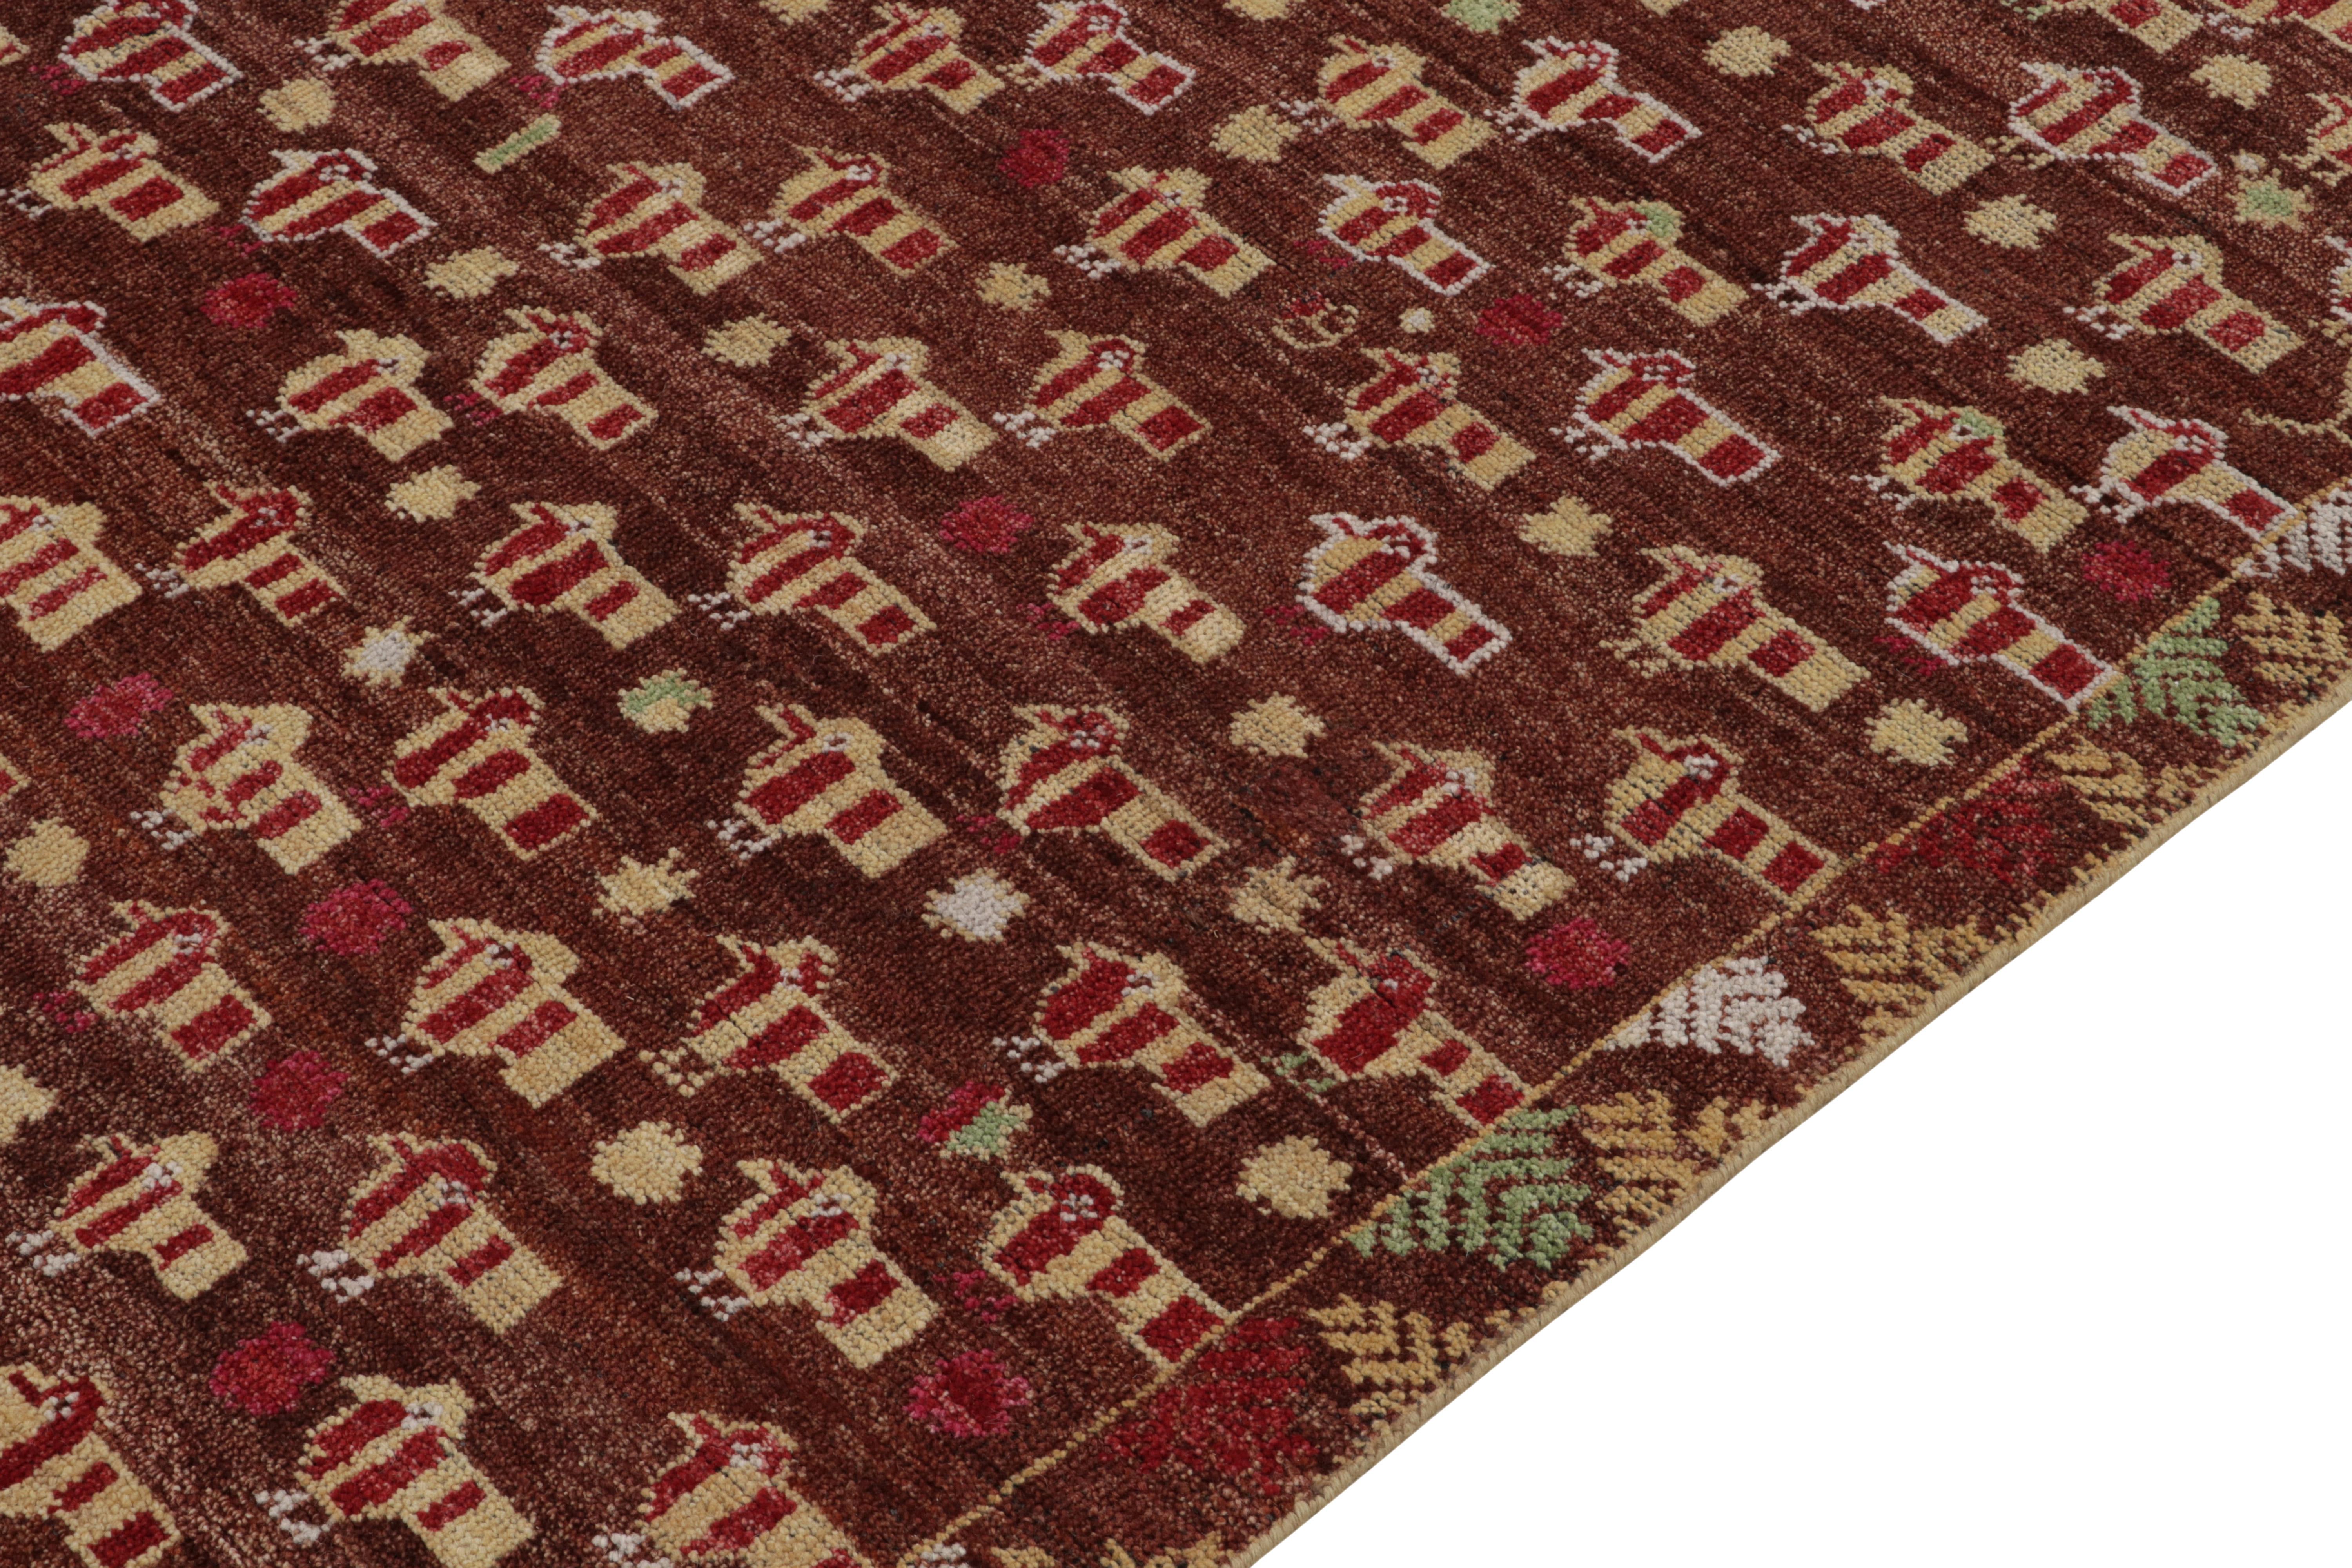 Hand-Knotted Rug & Kilim's Phulkari Style rug in Red, Brown, Beige Pictorial Pattern For Sale